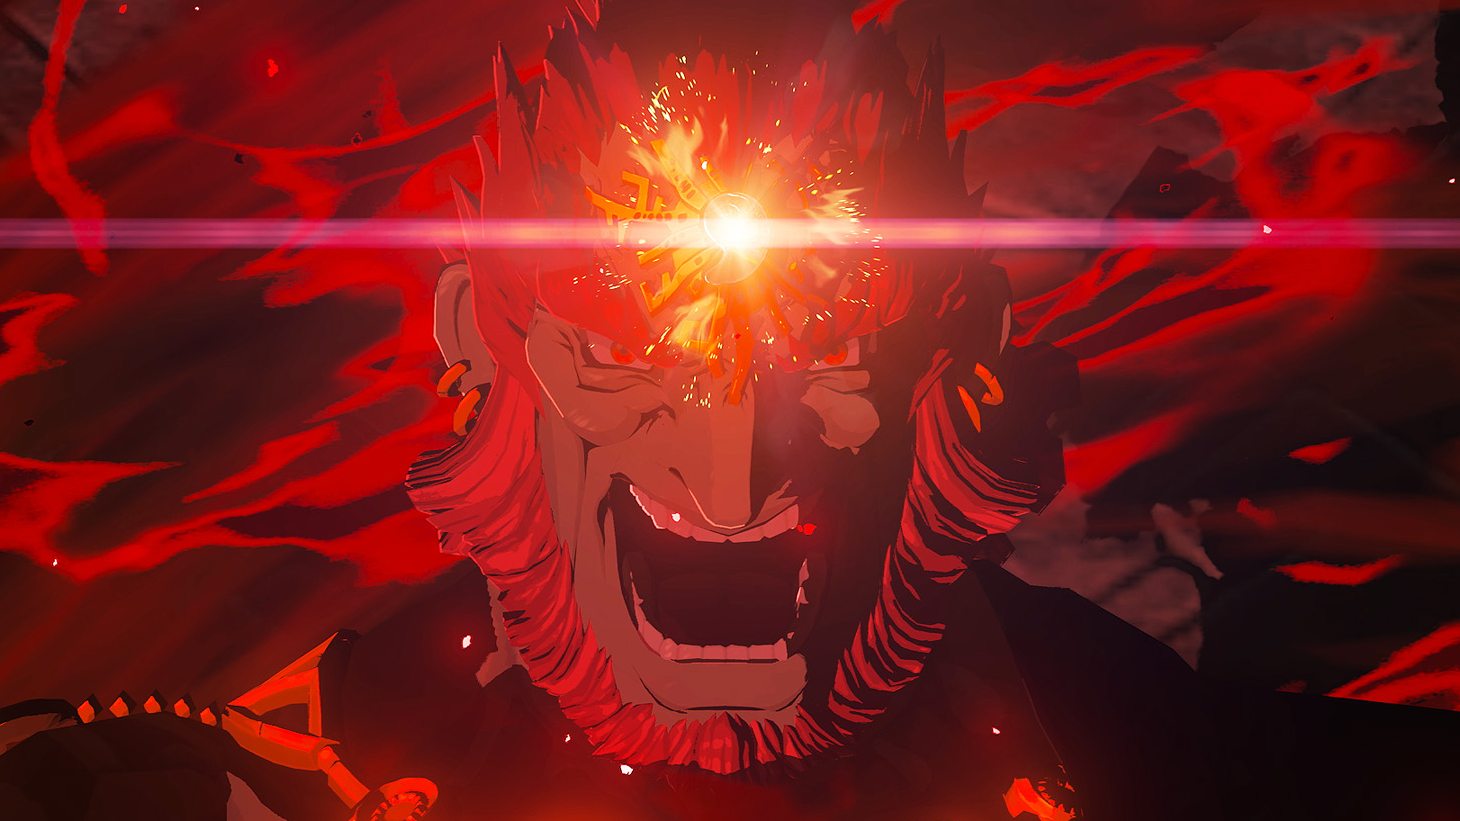 Tears of the Kingdom Characters: Ganondorf can be seen